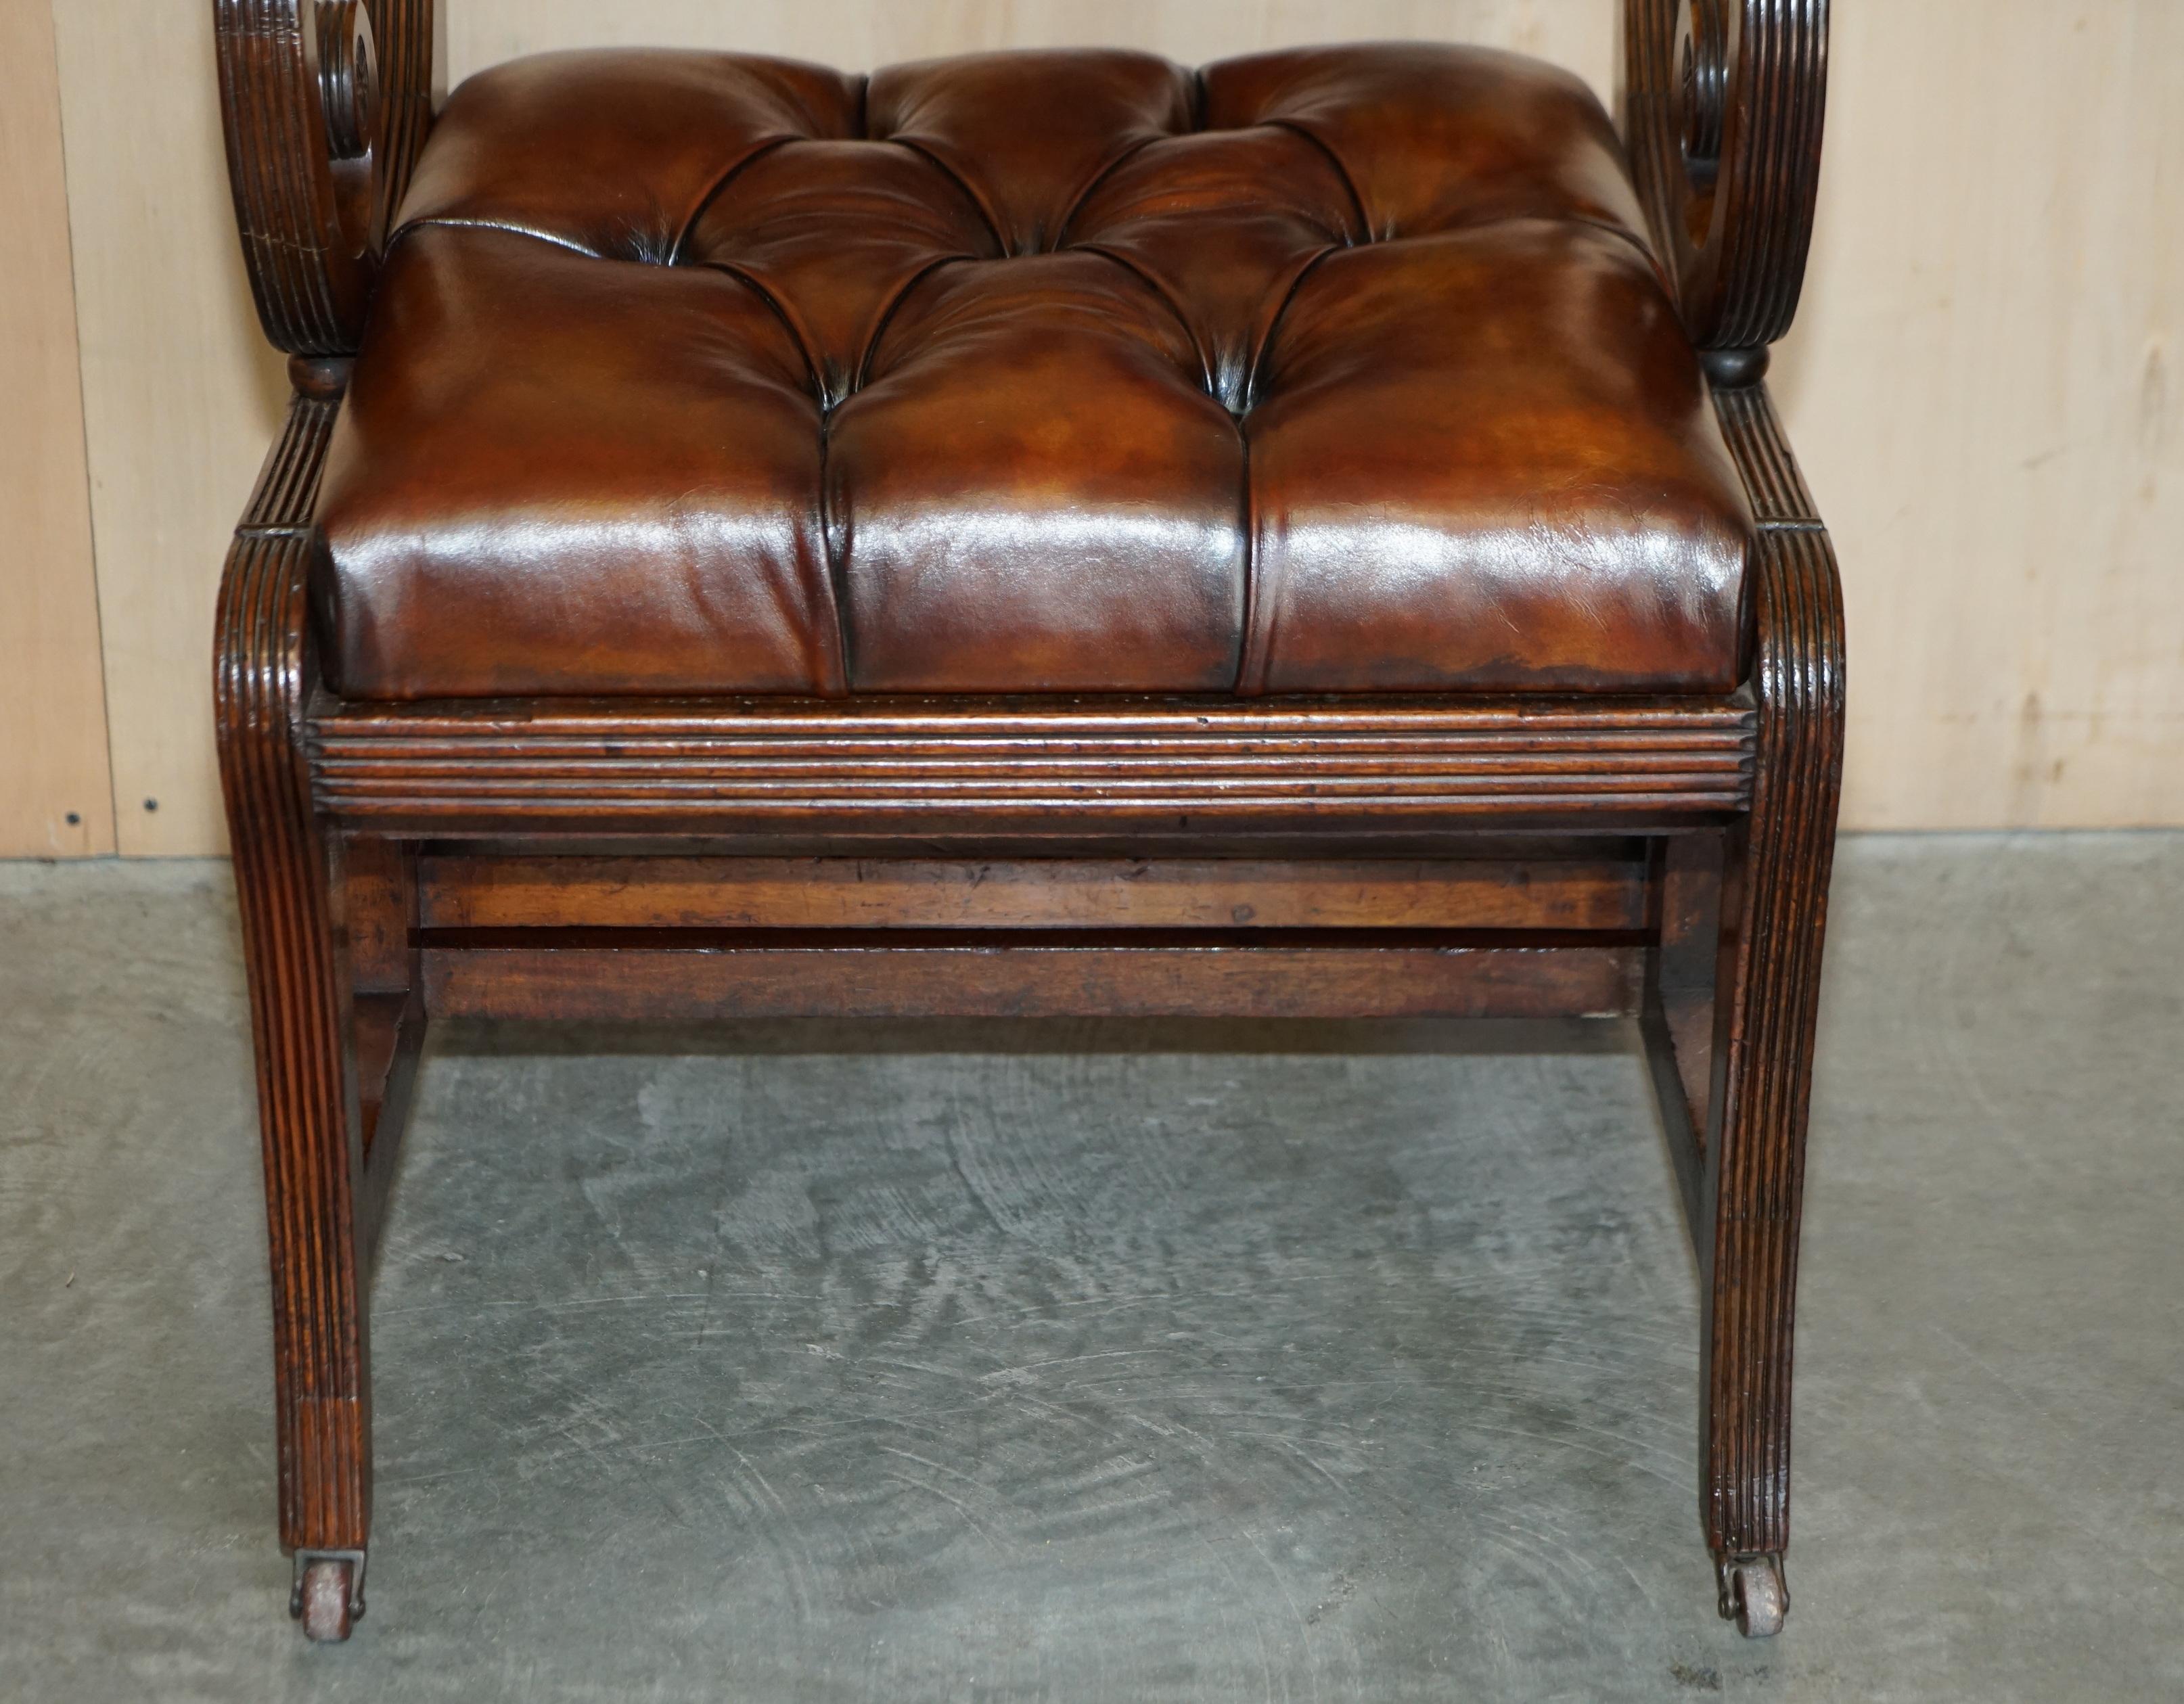 Hand-Crafted Antique 1810 Attributed to Gillows Metamorphic Leather Library Armchair Steps For Sale